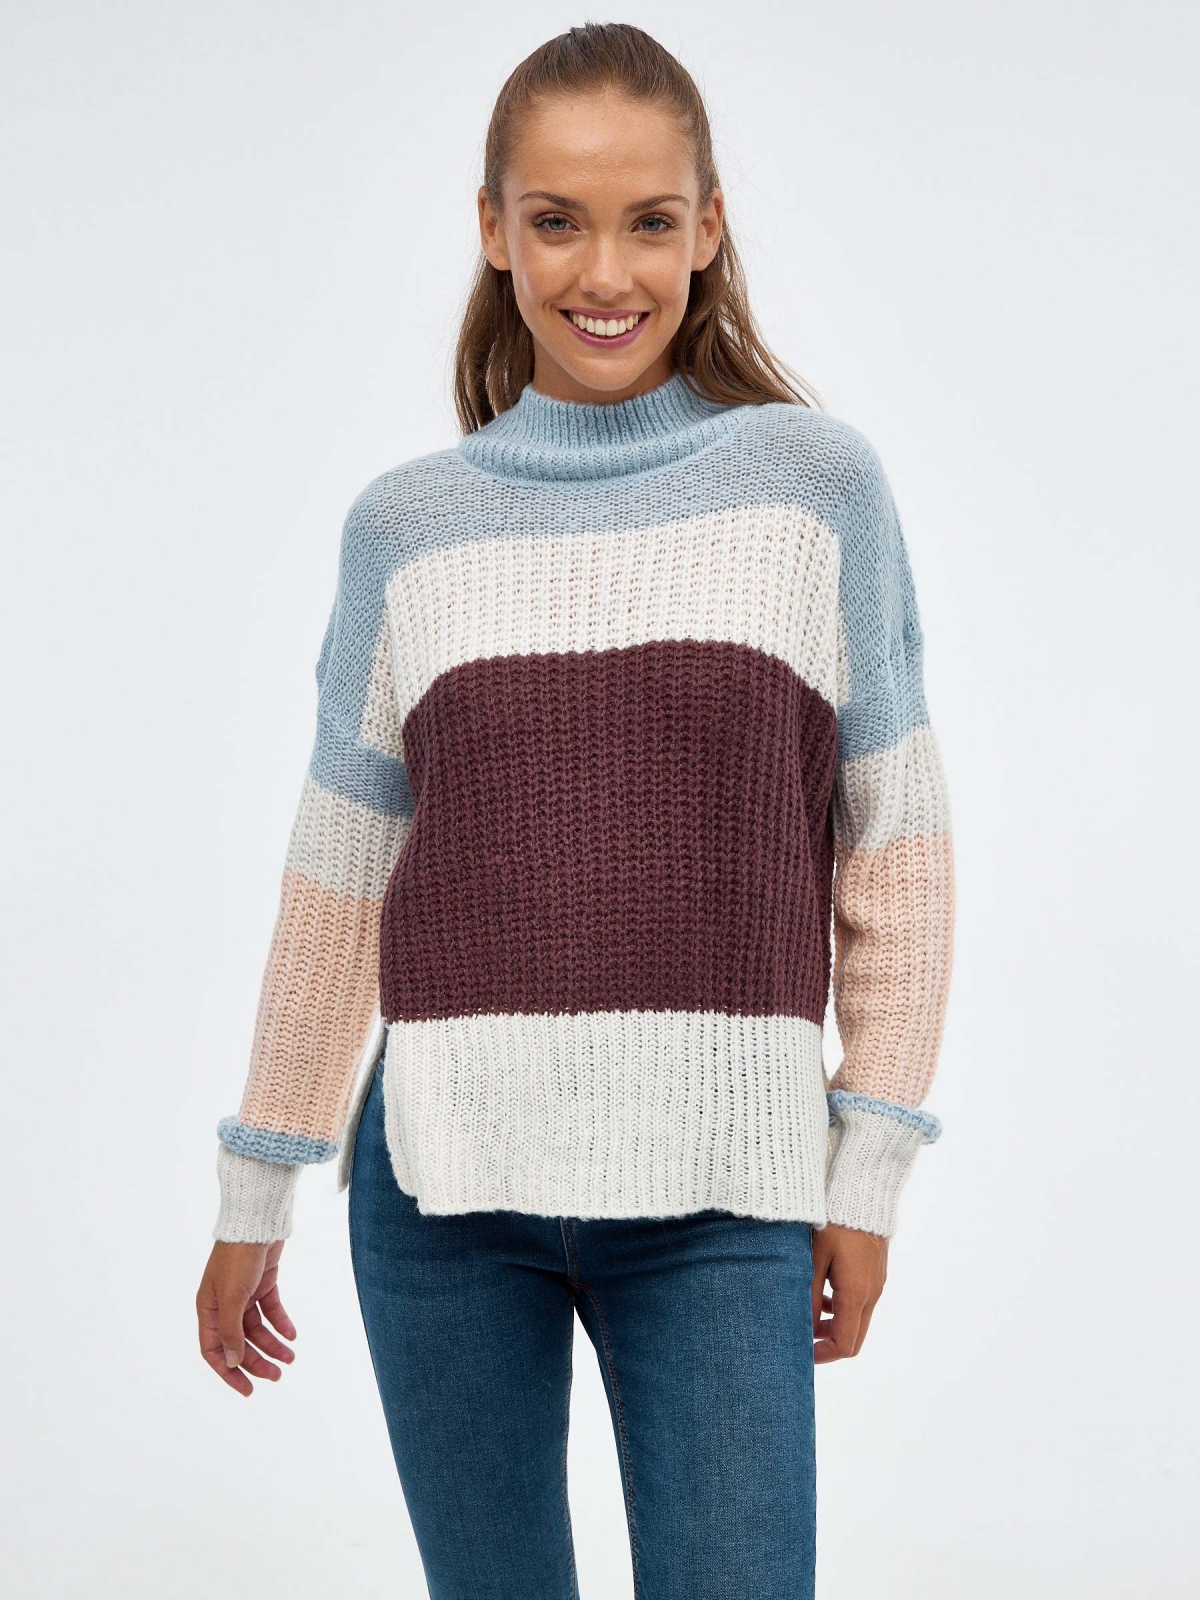 Perkins sweater with color block